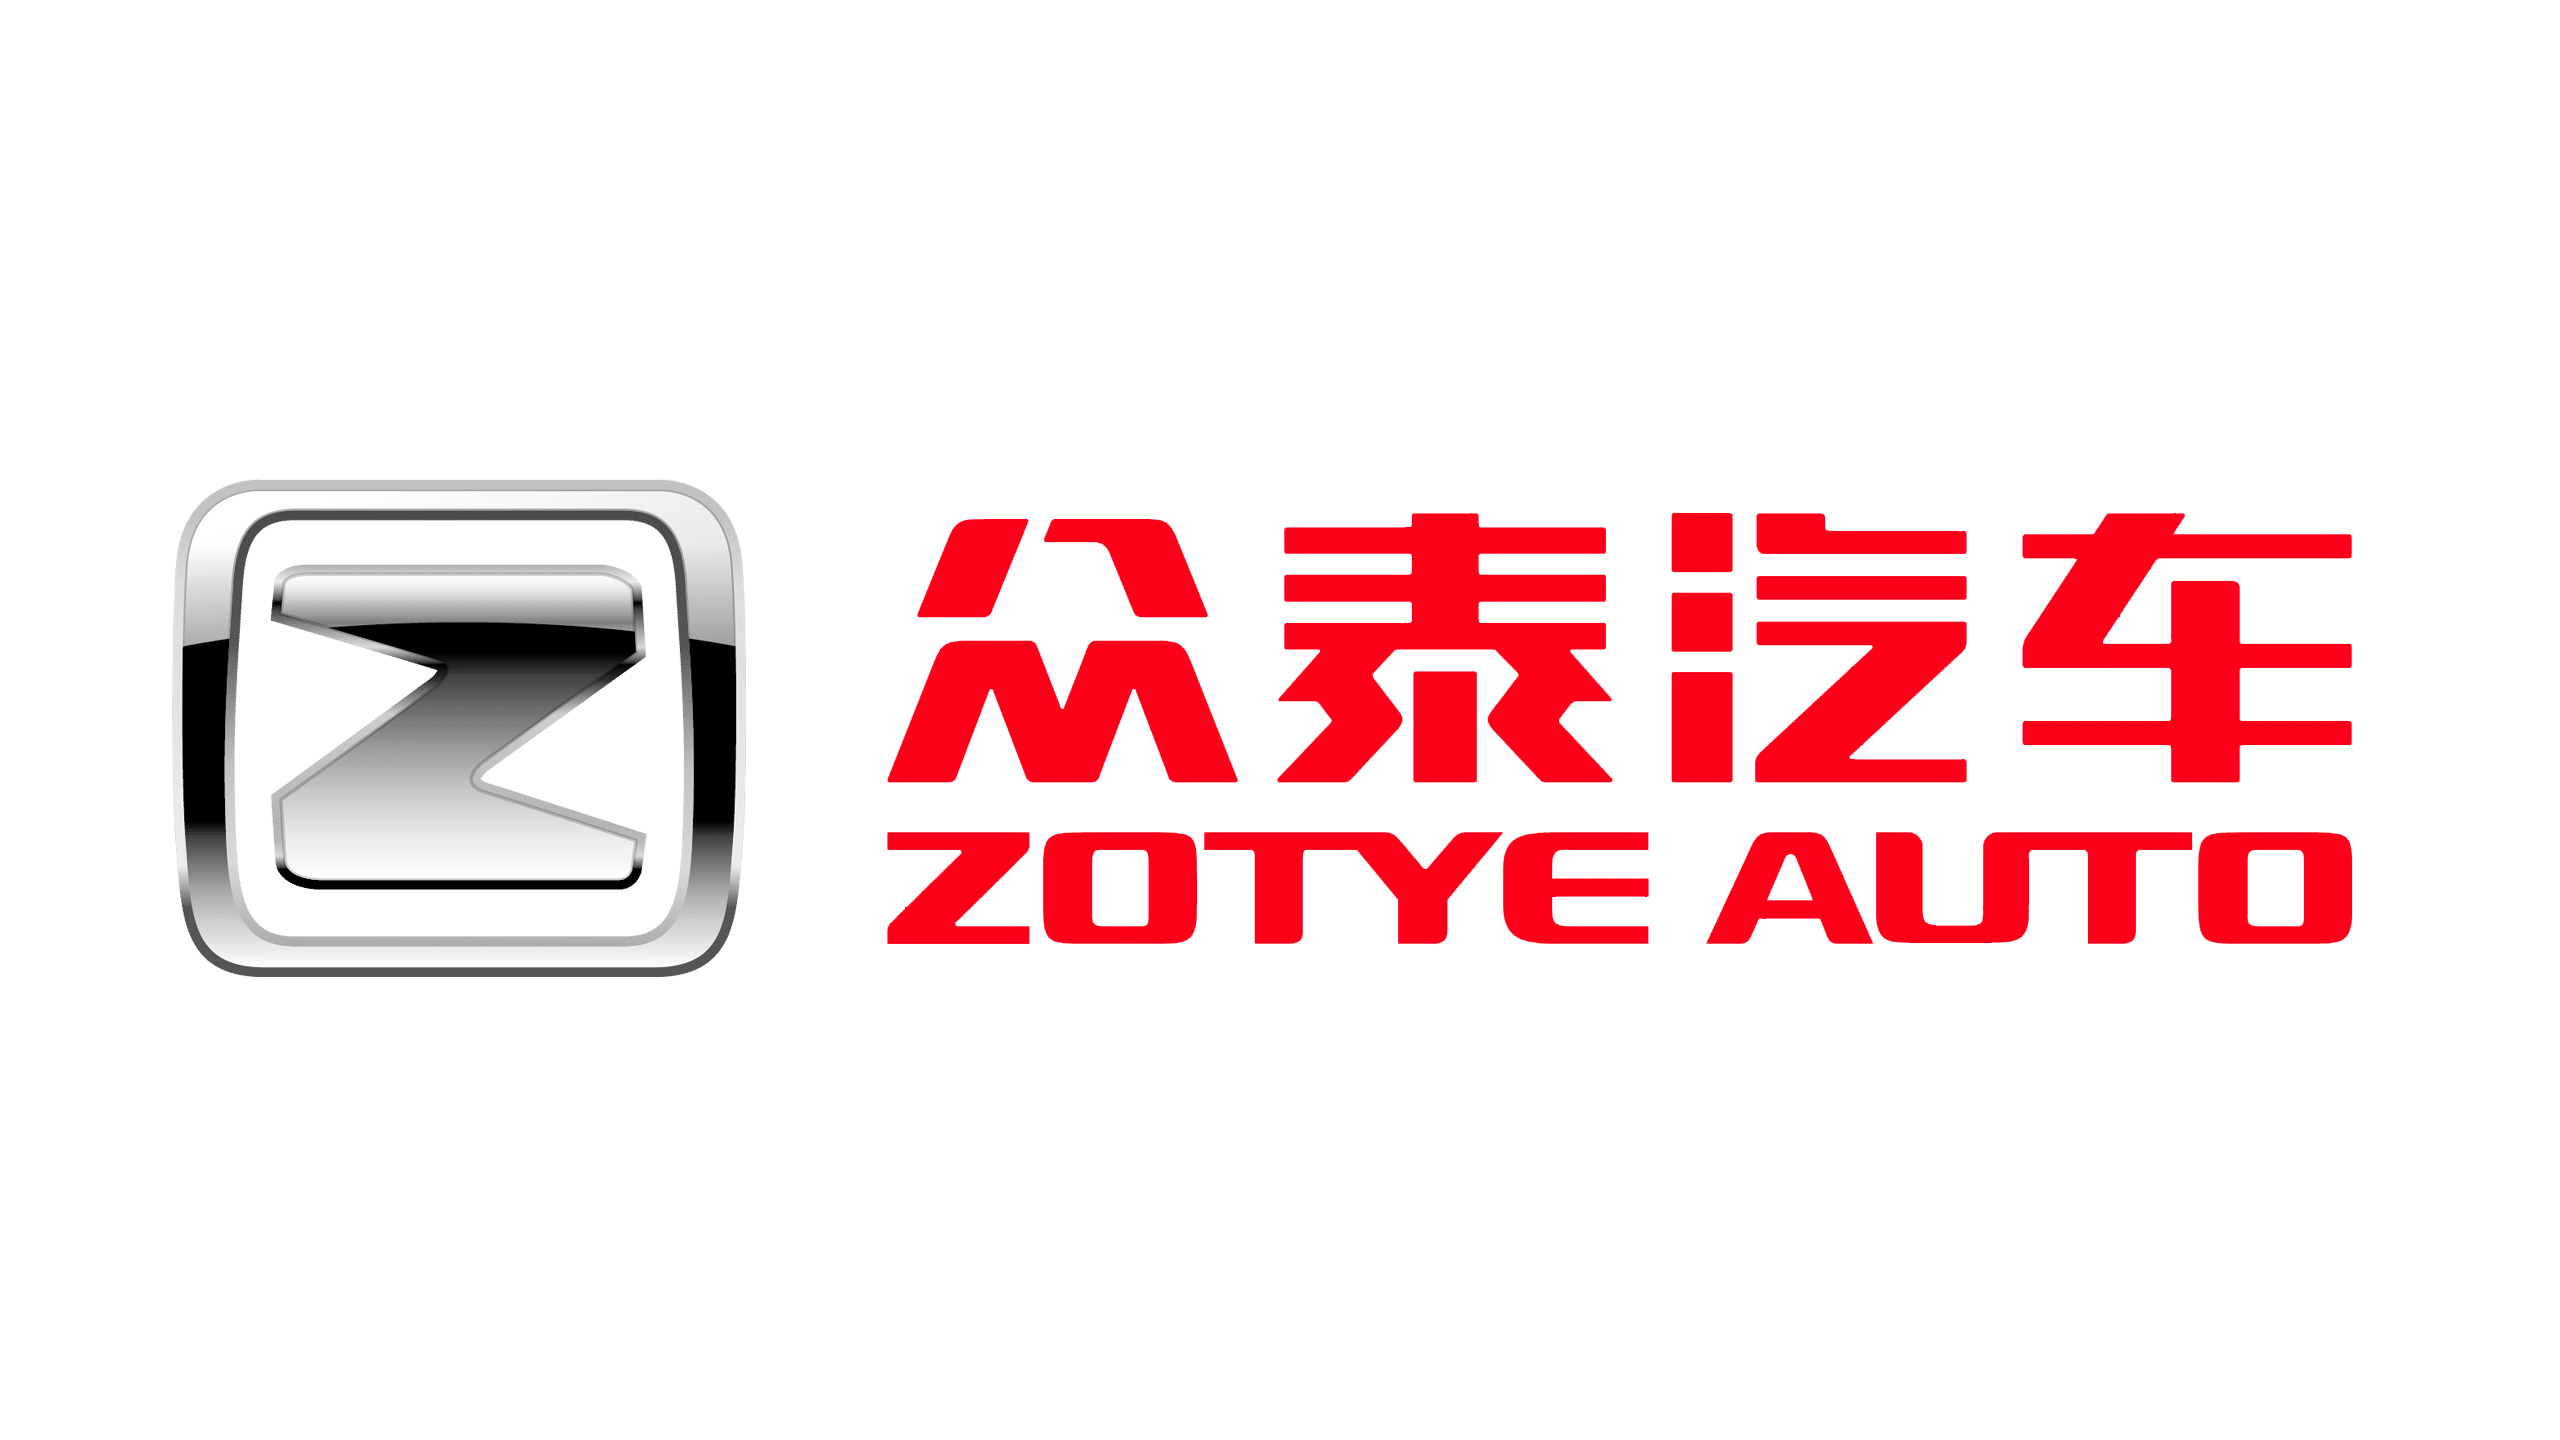 Zotye Car Brands Owned By China